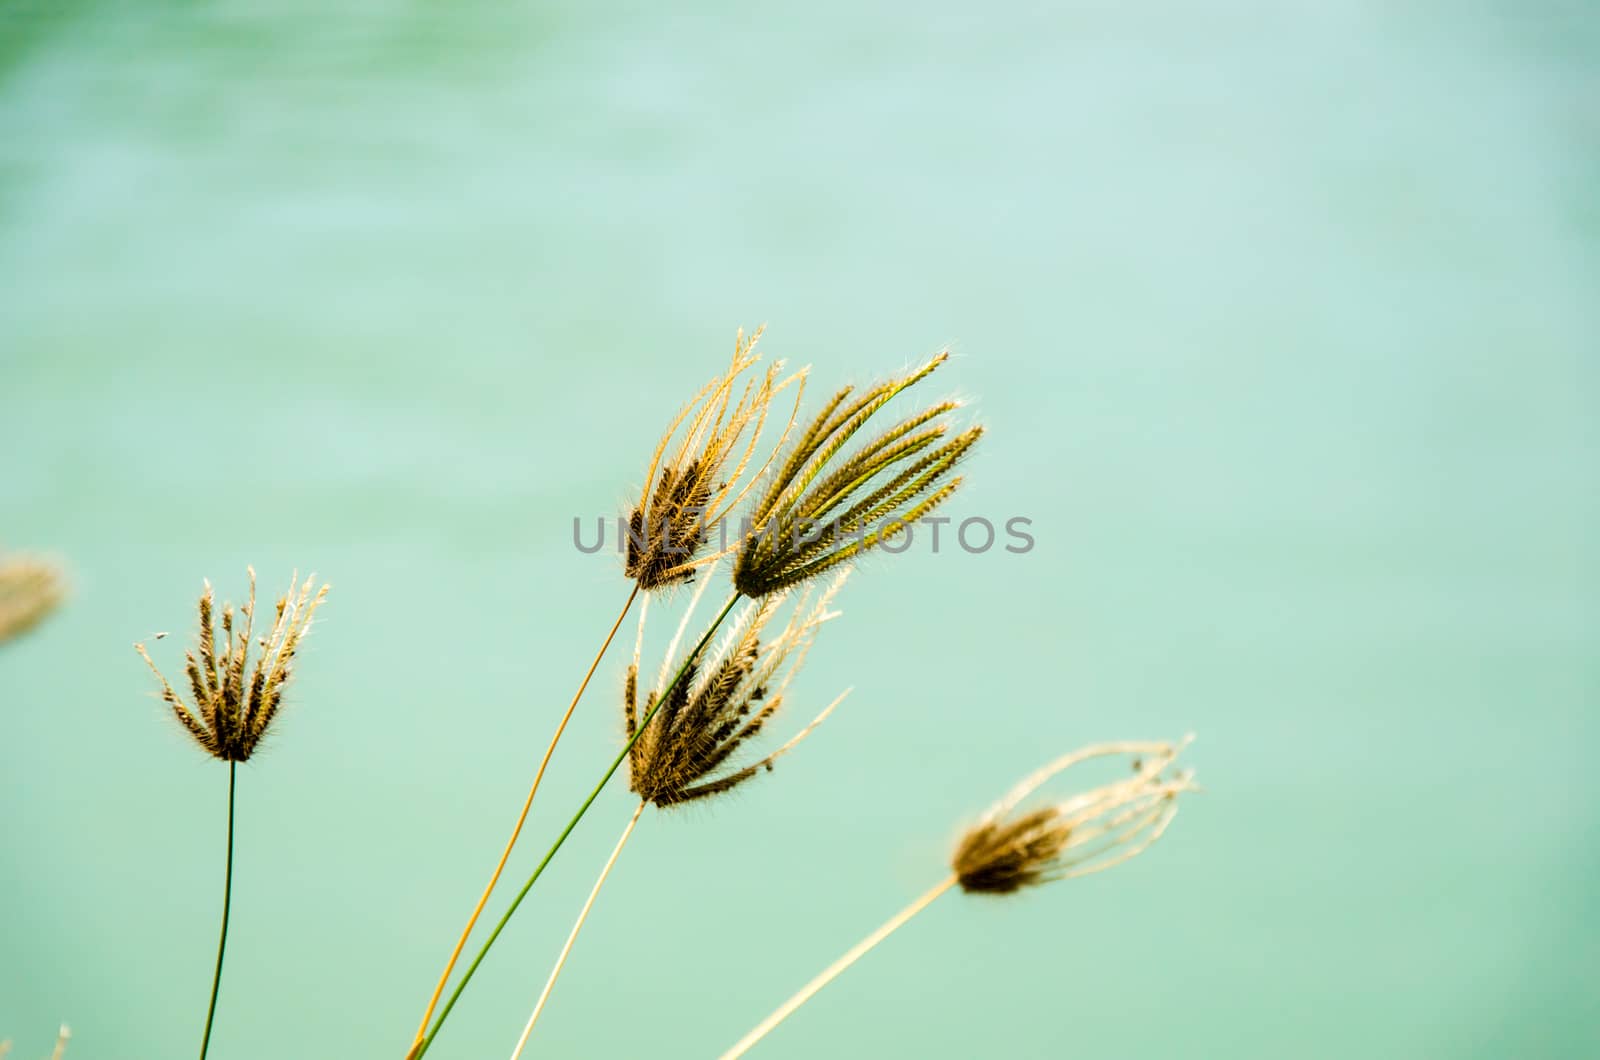 flower of grass by aoo3771